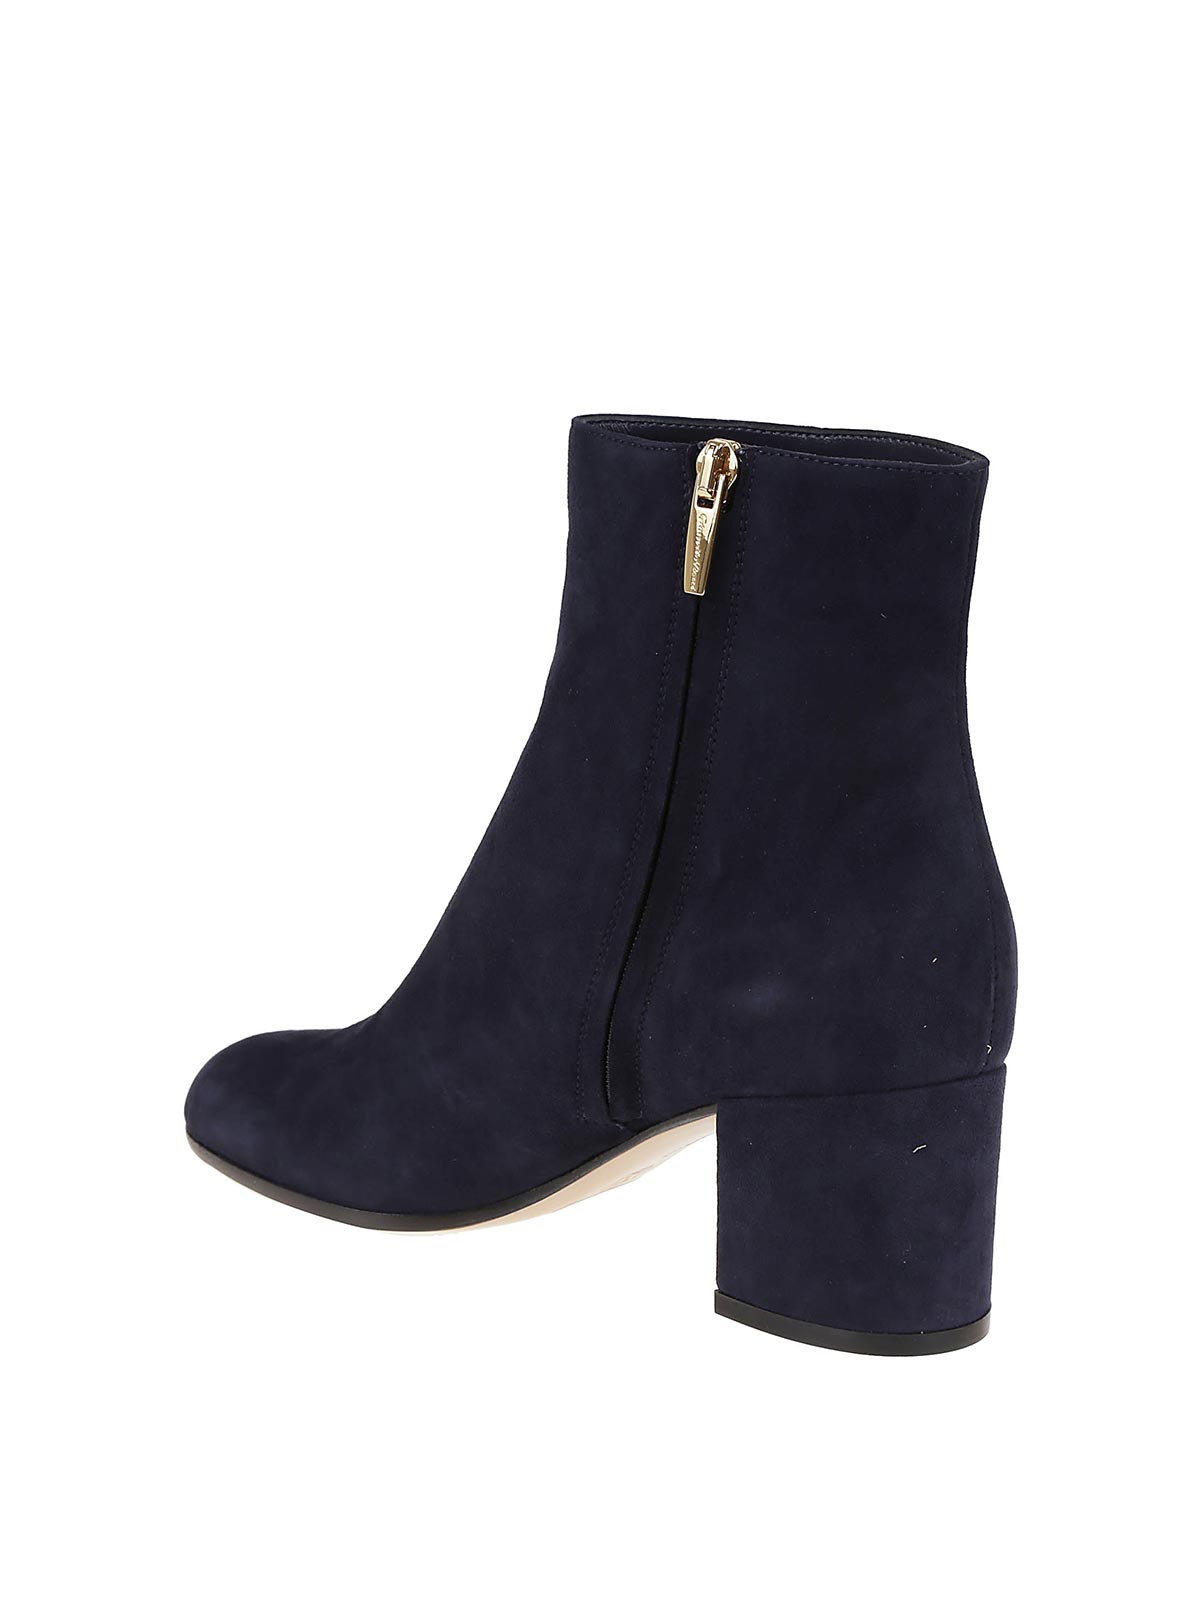 Margaux mid bootie suede boot